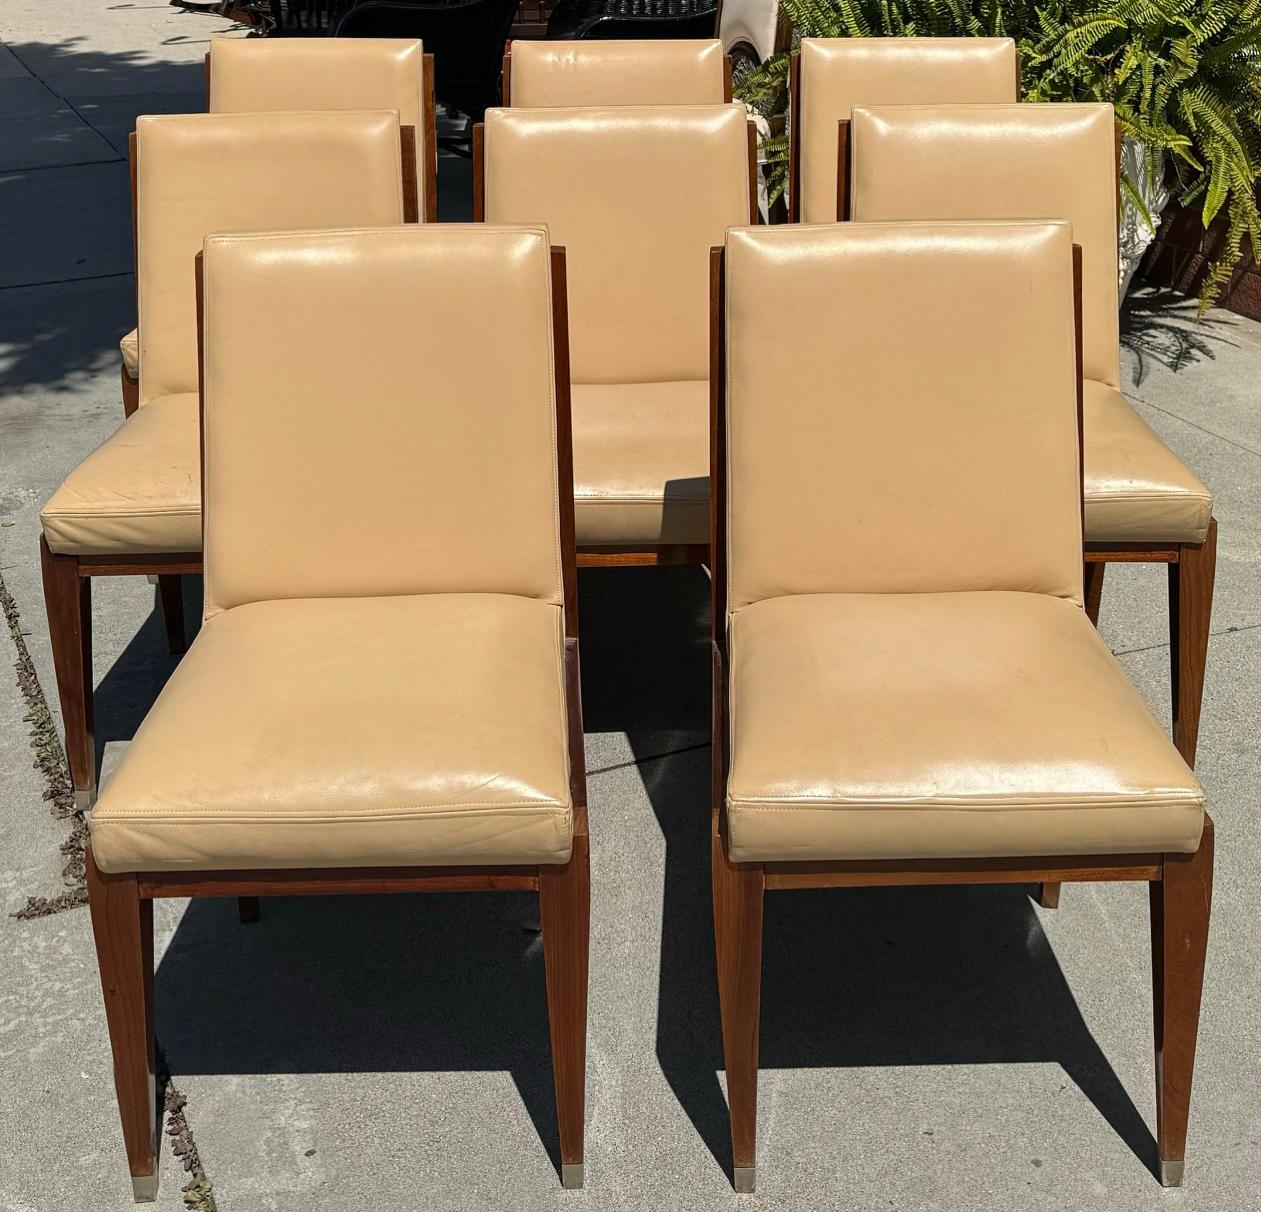 Pair of Christian Liaigre Modern Designer Leather Dining or Side Chairs. This listing is for one pair of chairs but we actually have four pair available.